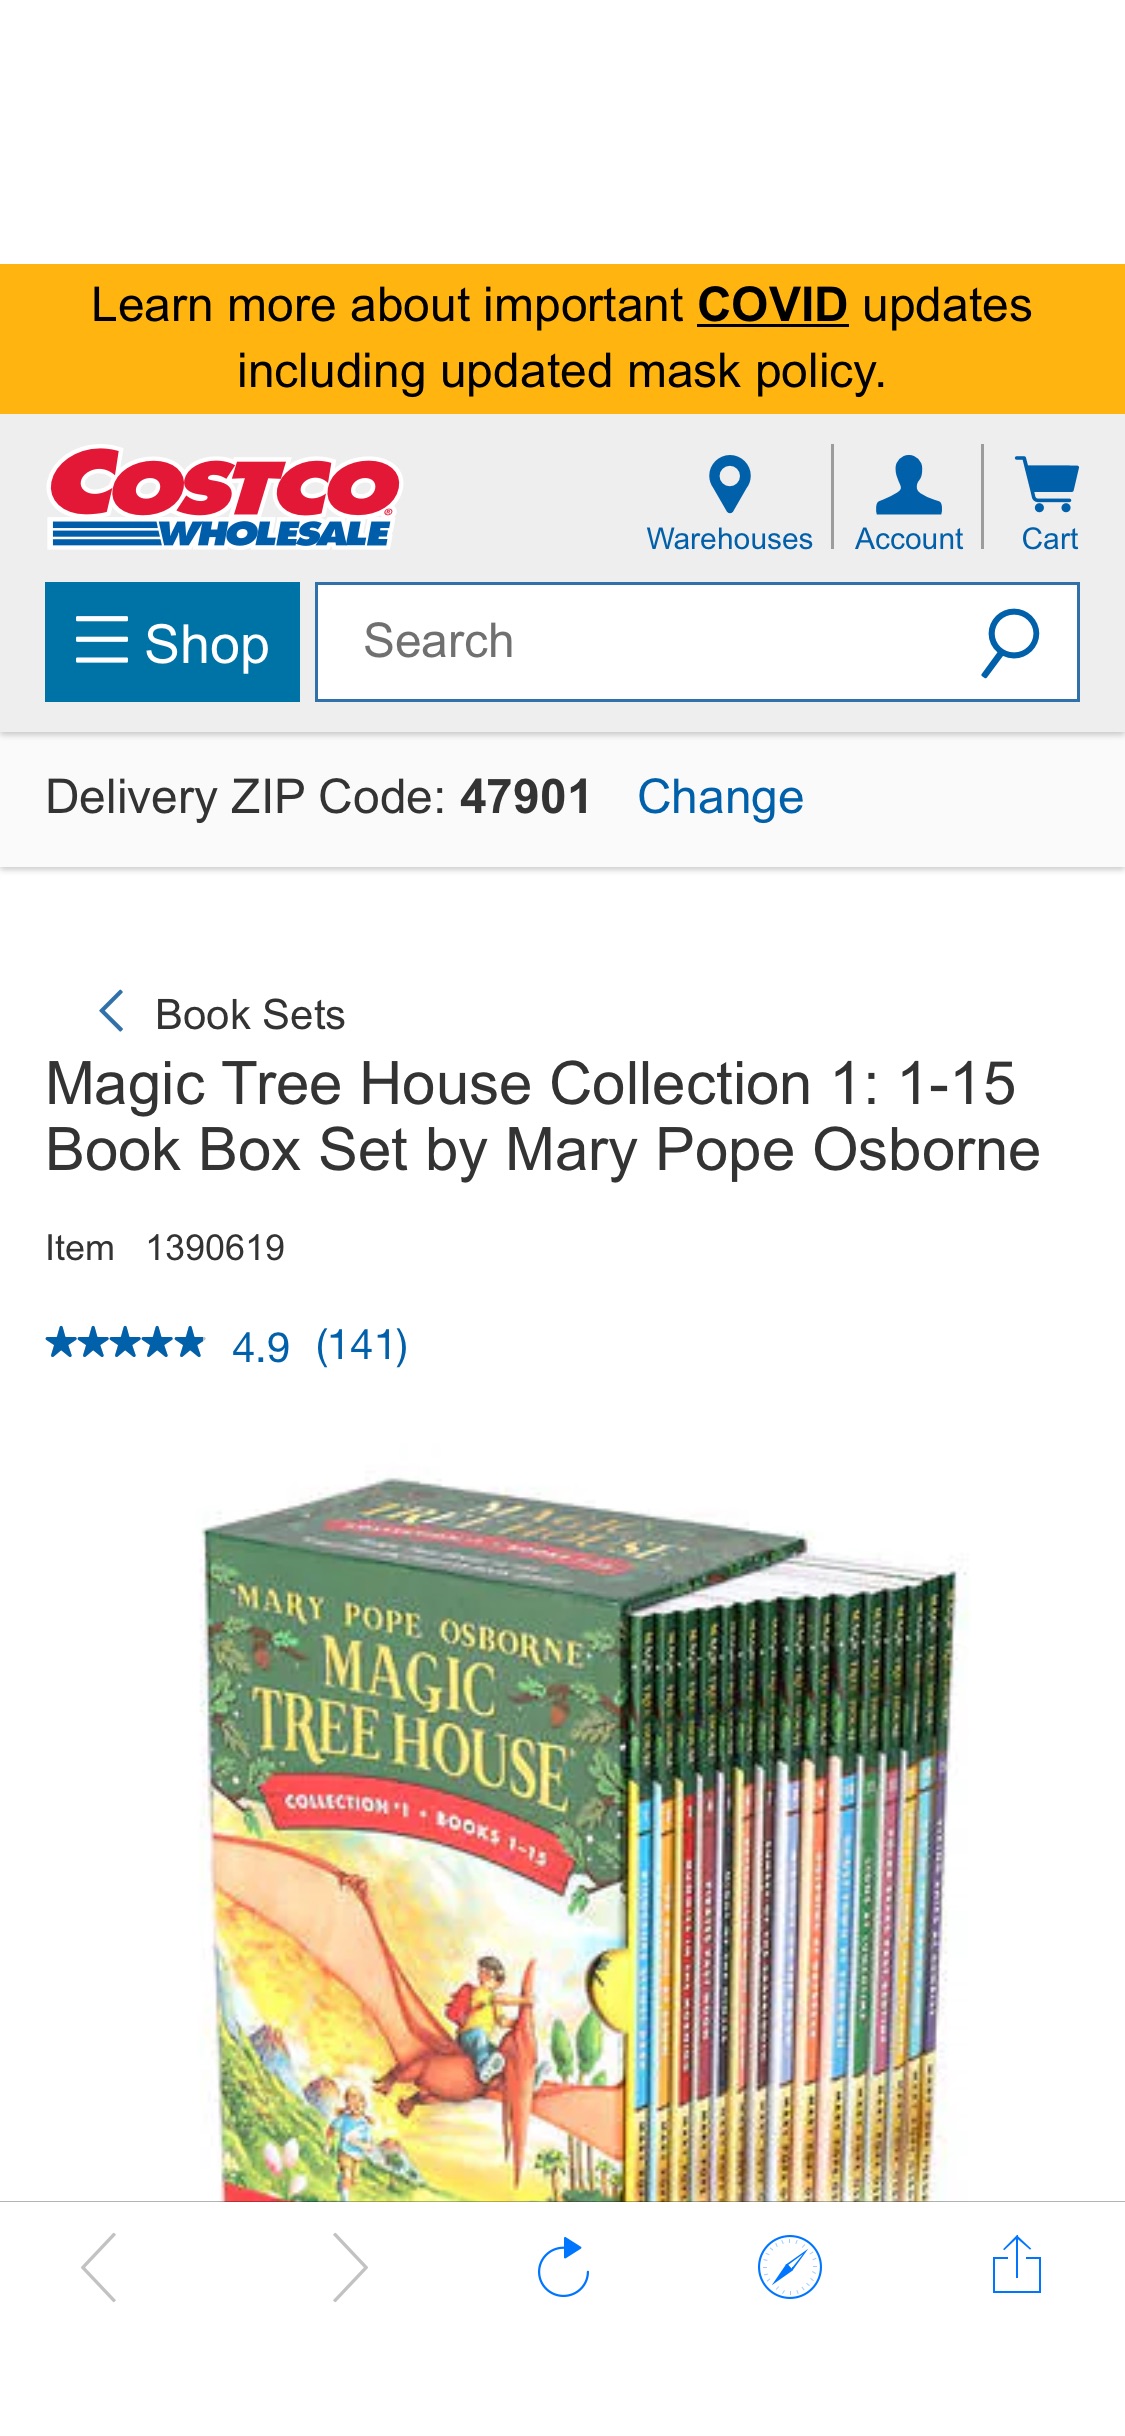 Magic Tree House Collection 1: 1-15 Book Box Set by Mary Pope Osborne 神奇树屋史低